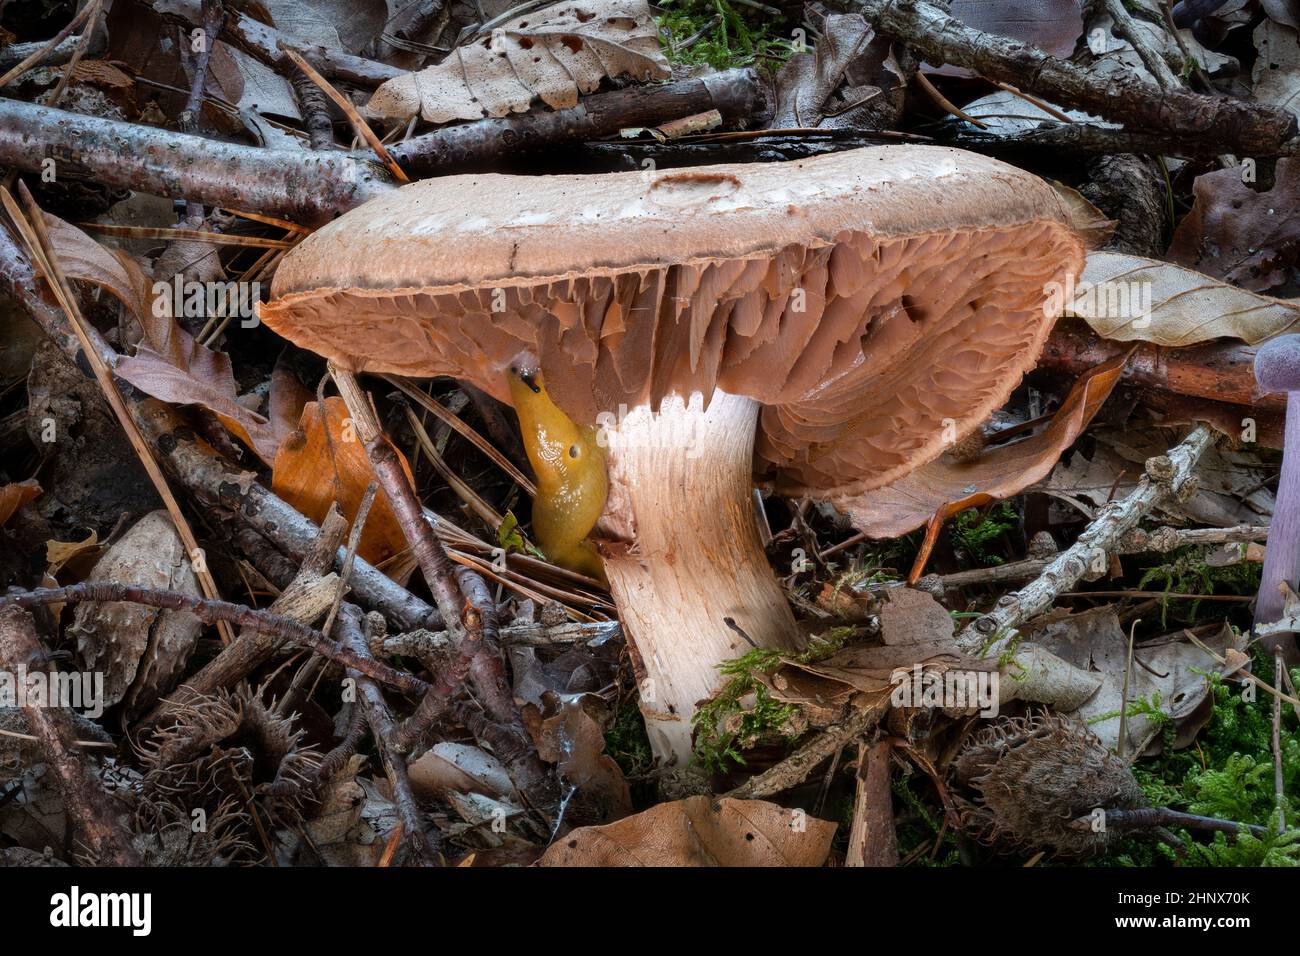 Side view of a single Cortinarius mushroom between leaves and pine needles Stock Photo